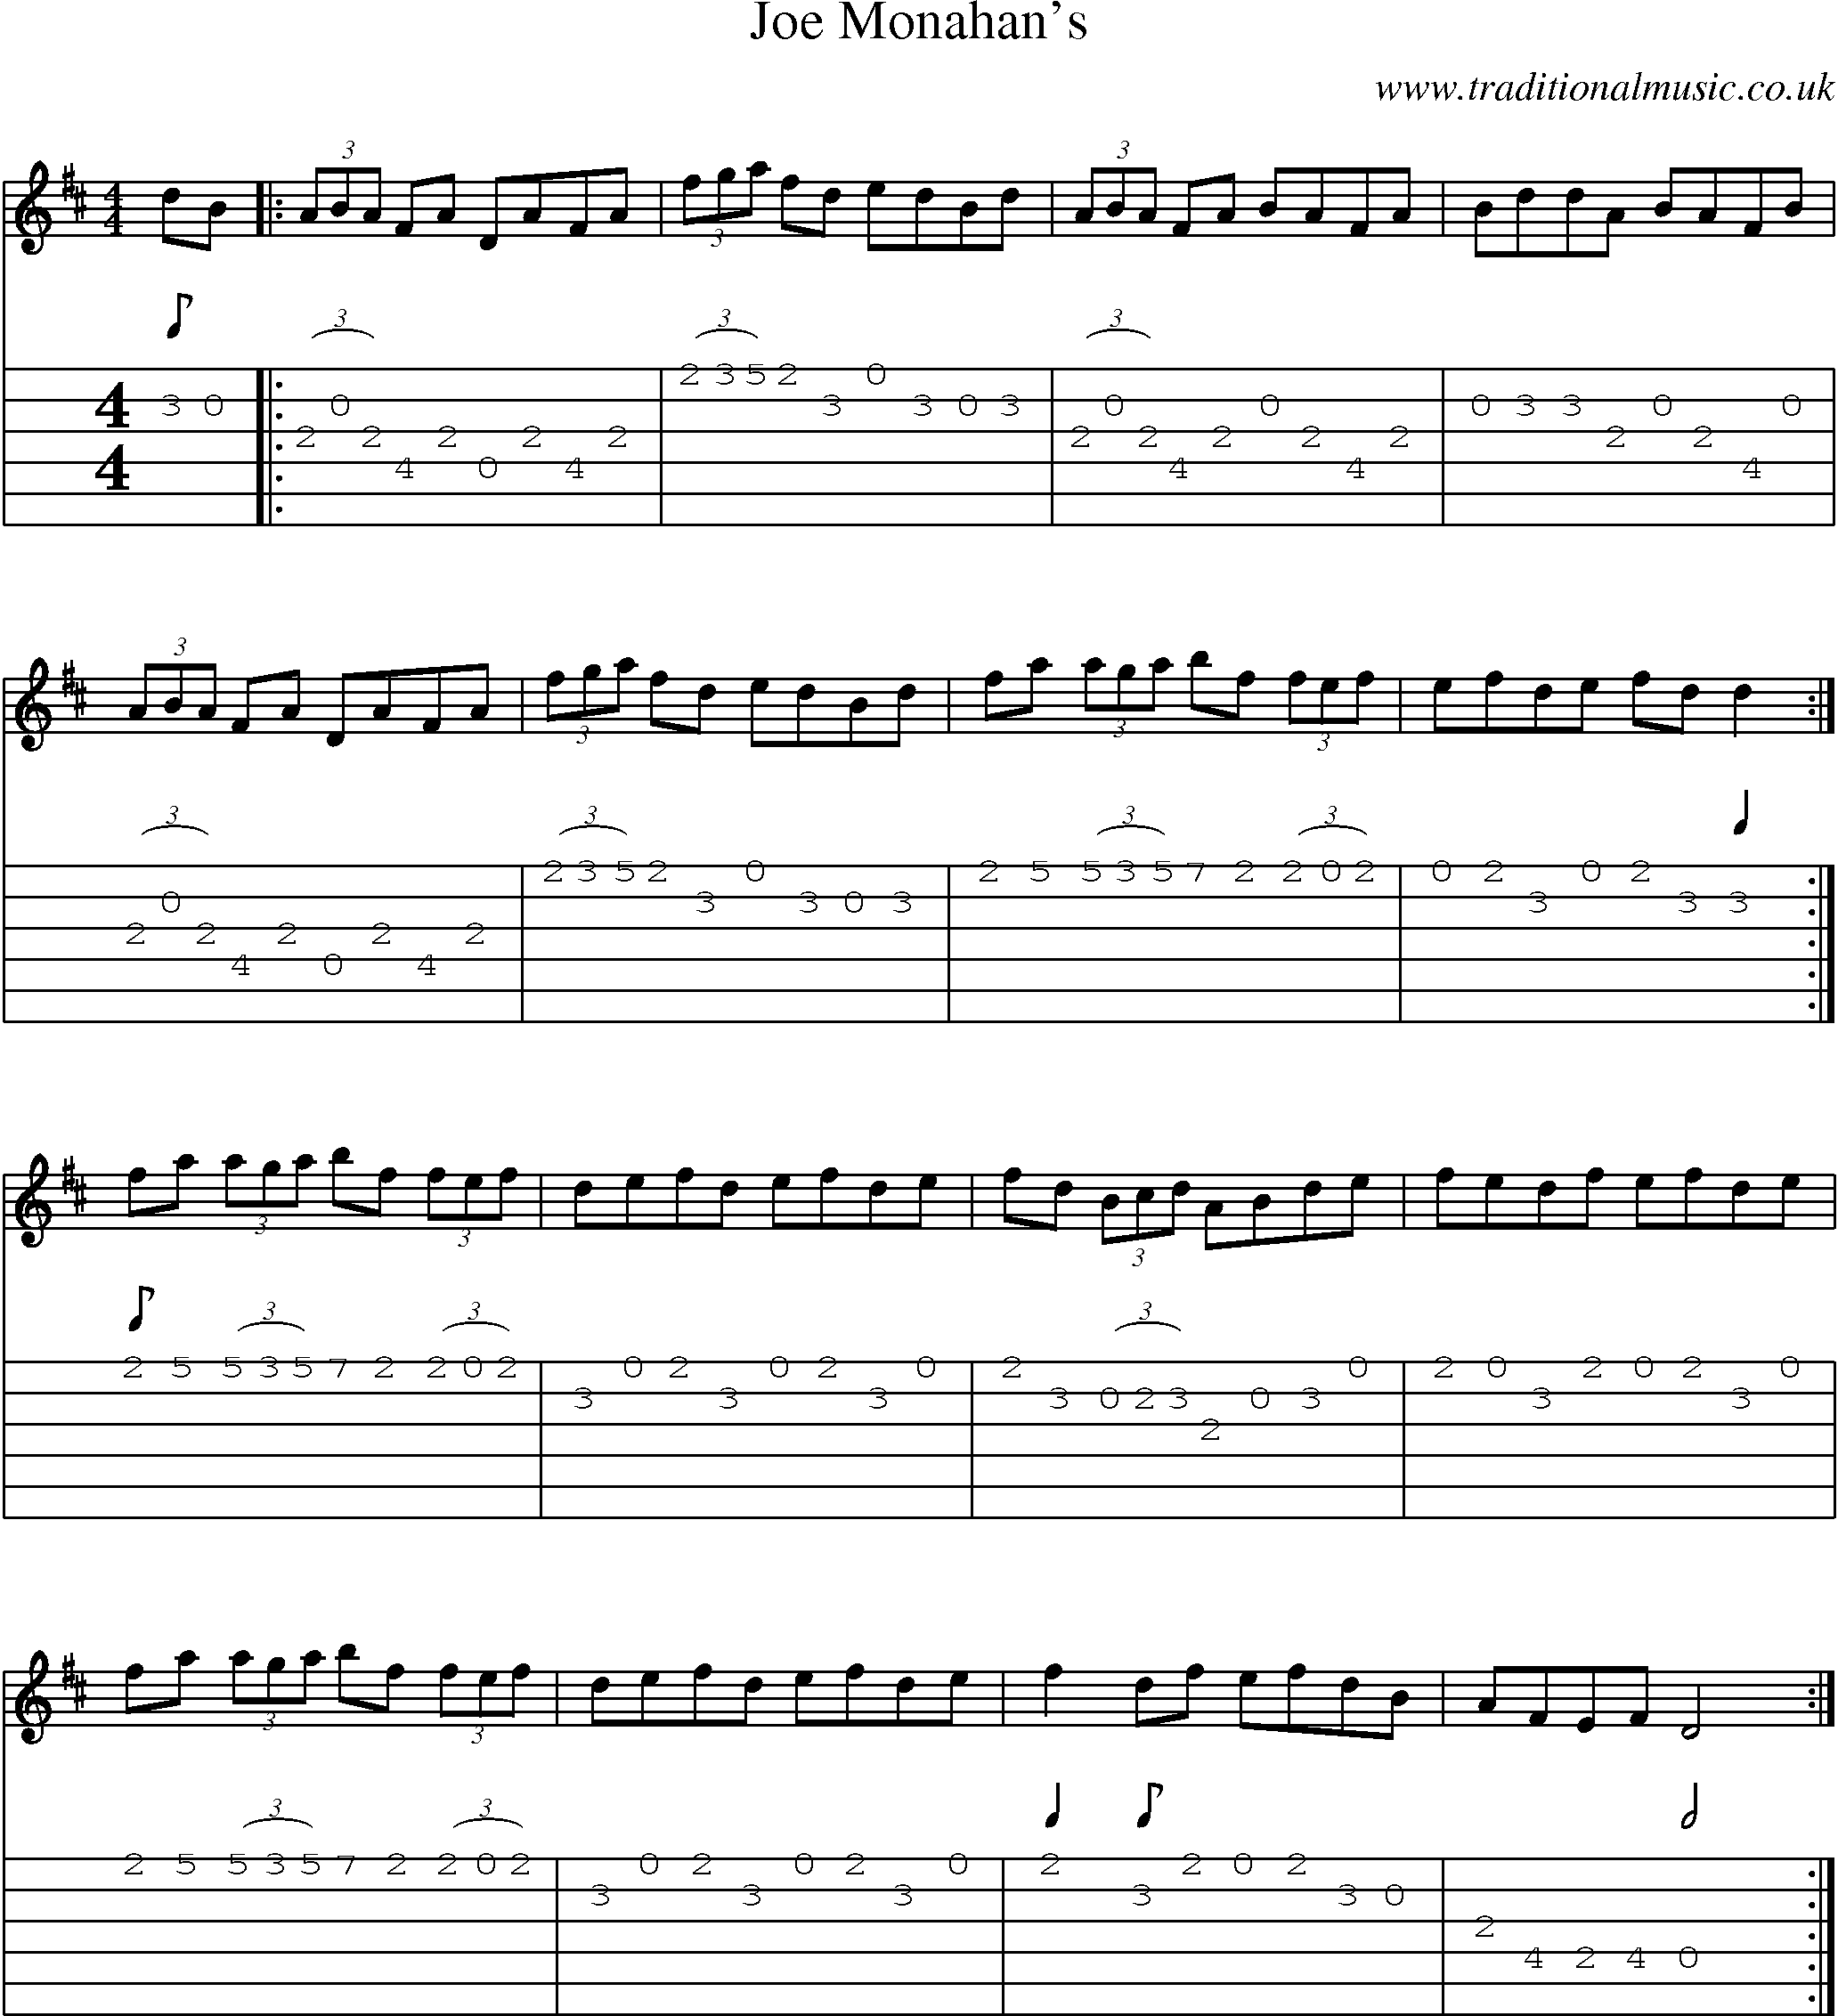 Music Score and Guitar Tabs for Joe Monahans